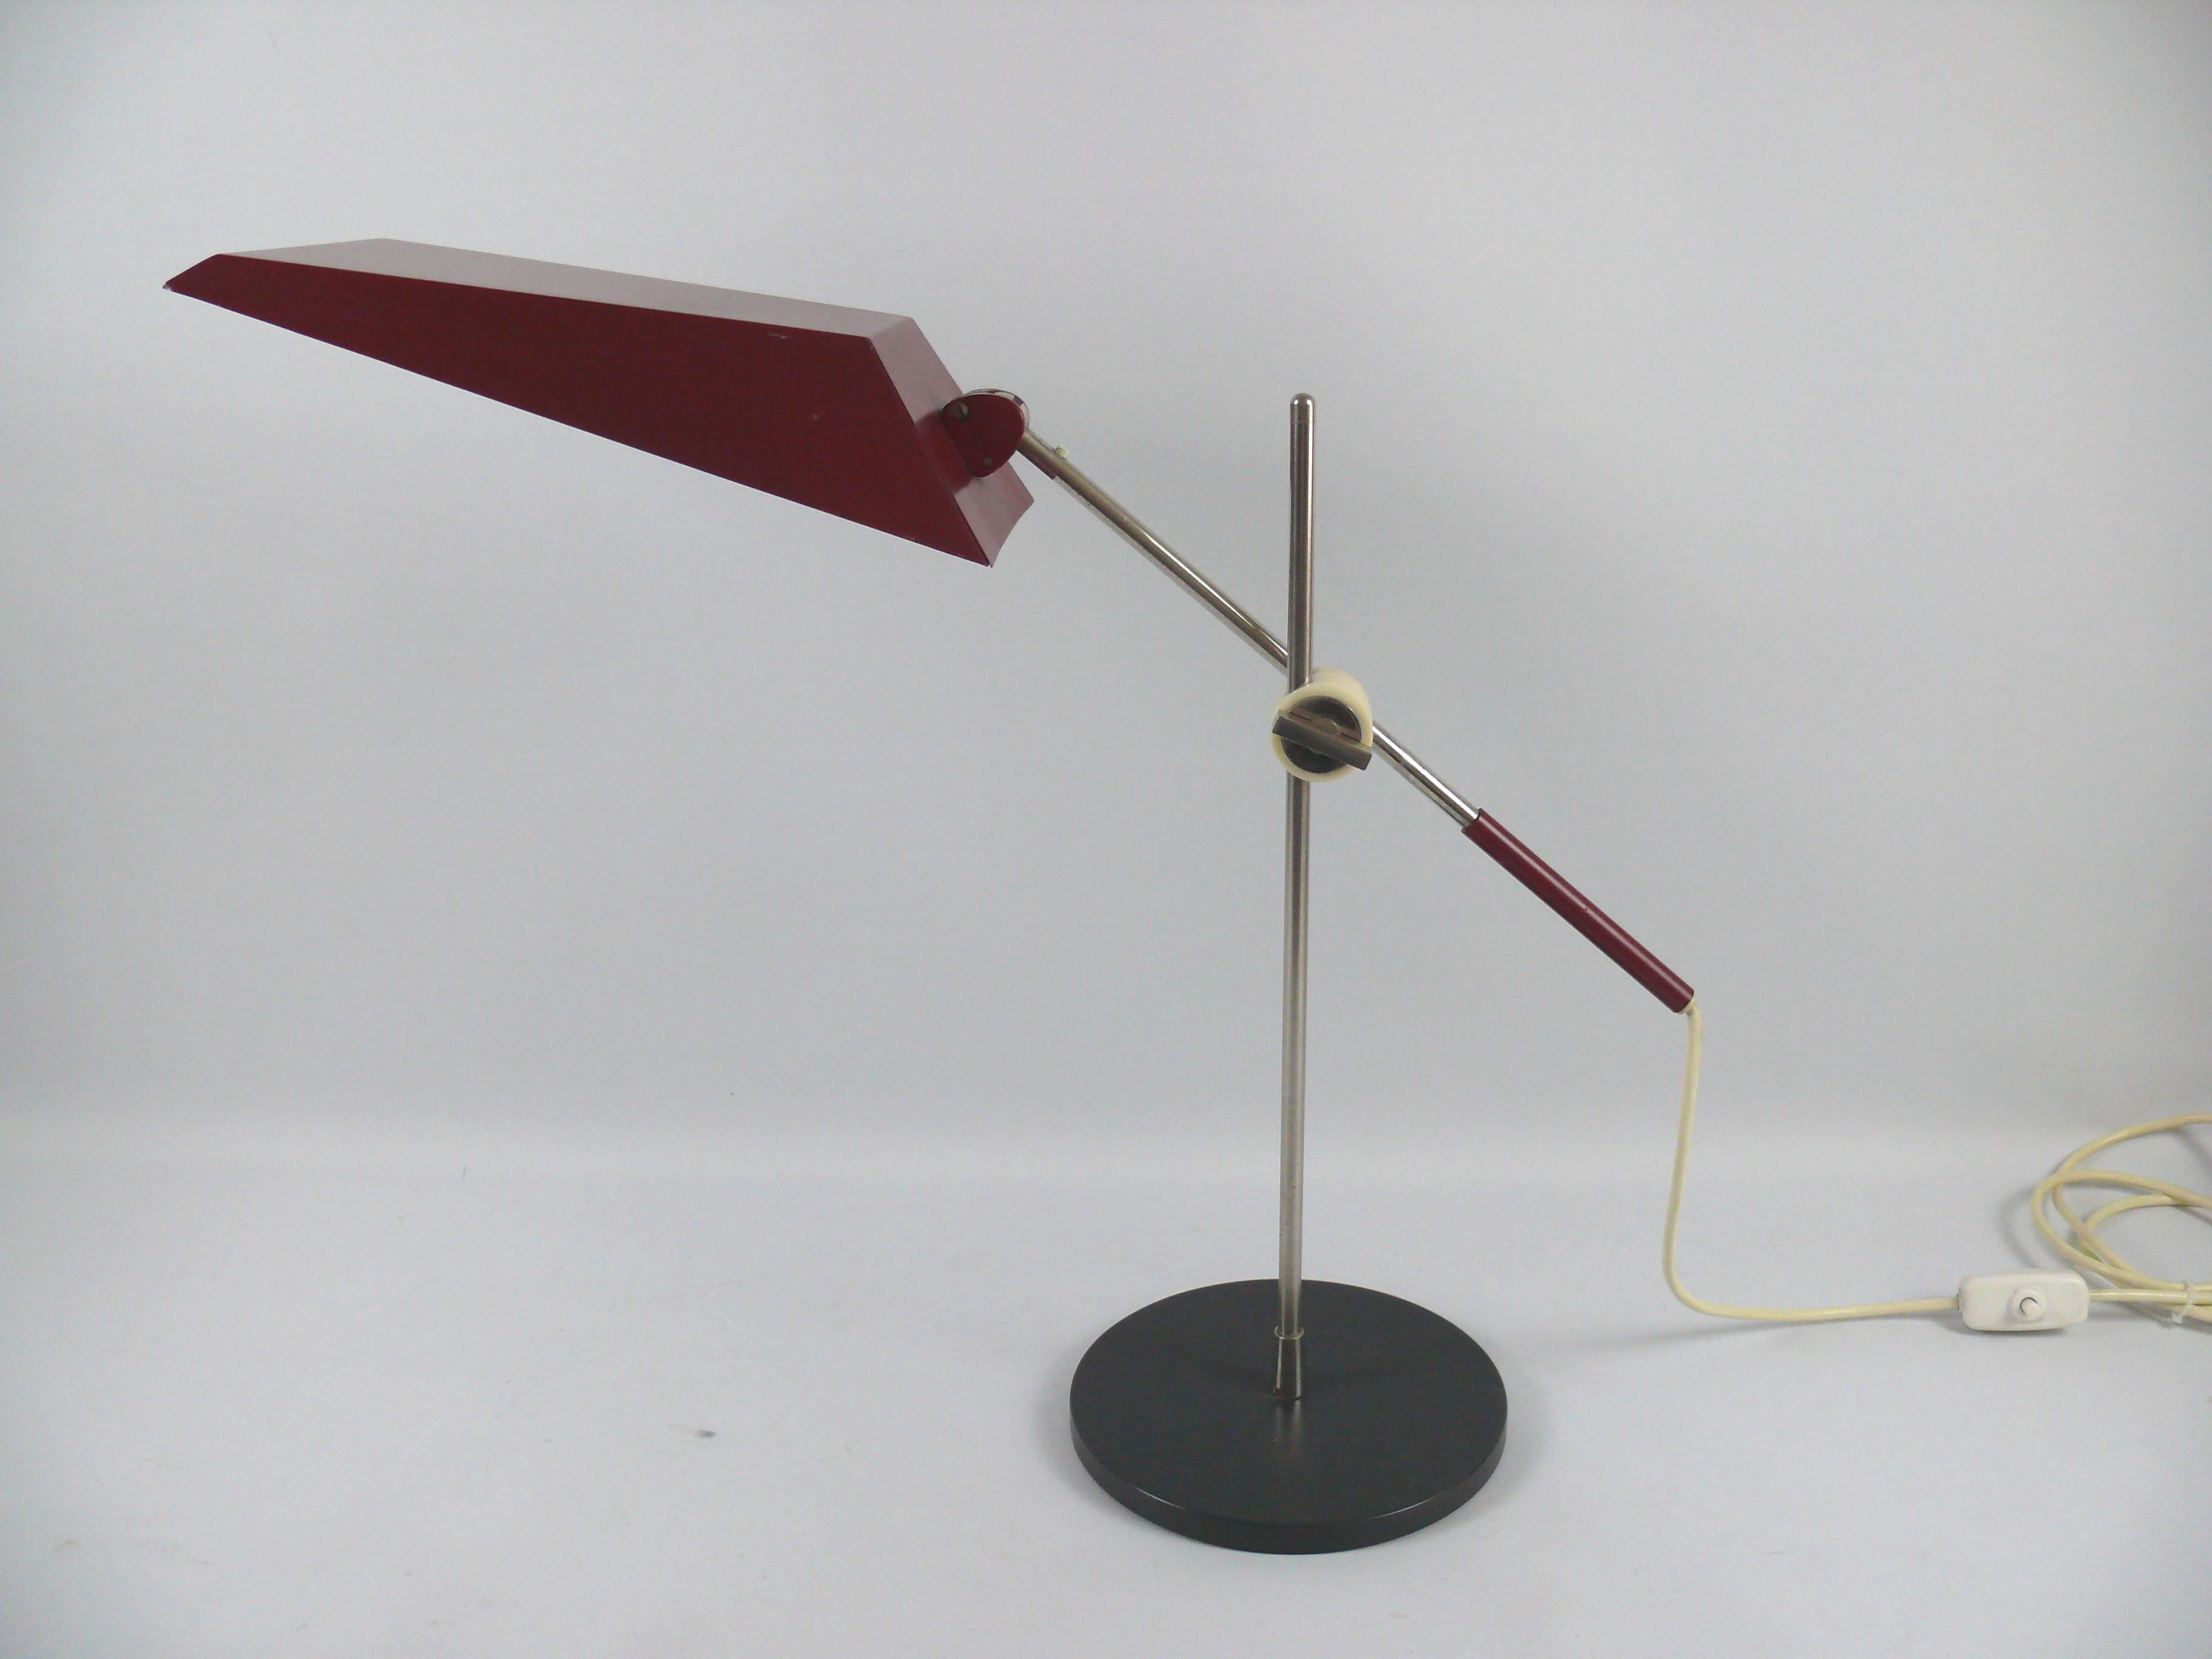 Extremely rare set of 1960s lamps by the well-known lighting company Kaiser Leuchten, Arnsberg - Germany. The lampshades are designed in an elegant geometric style and painted maroon. The three lamps have all the same lampshades.

Desklamp - Model